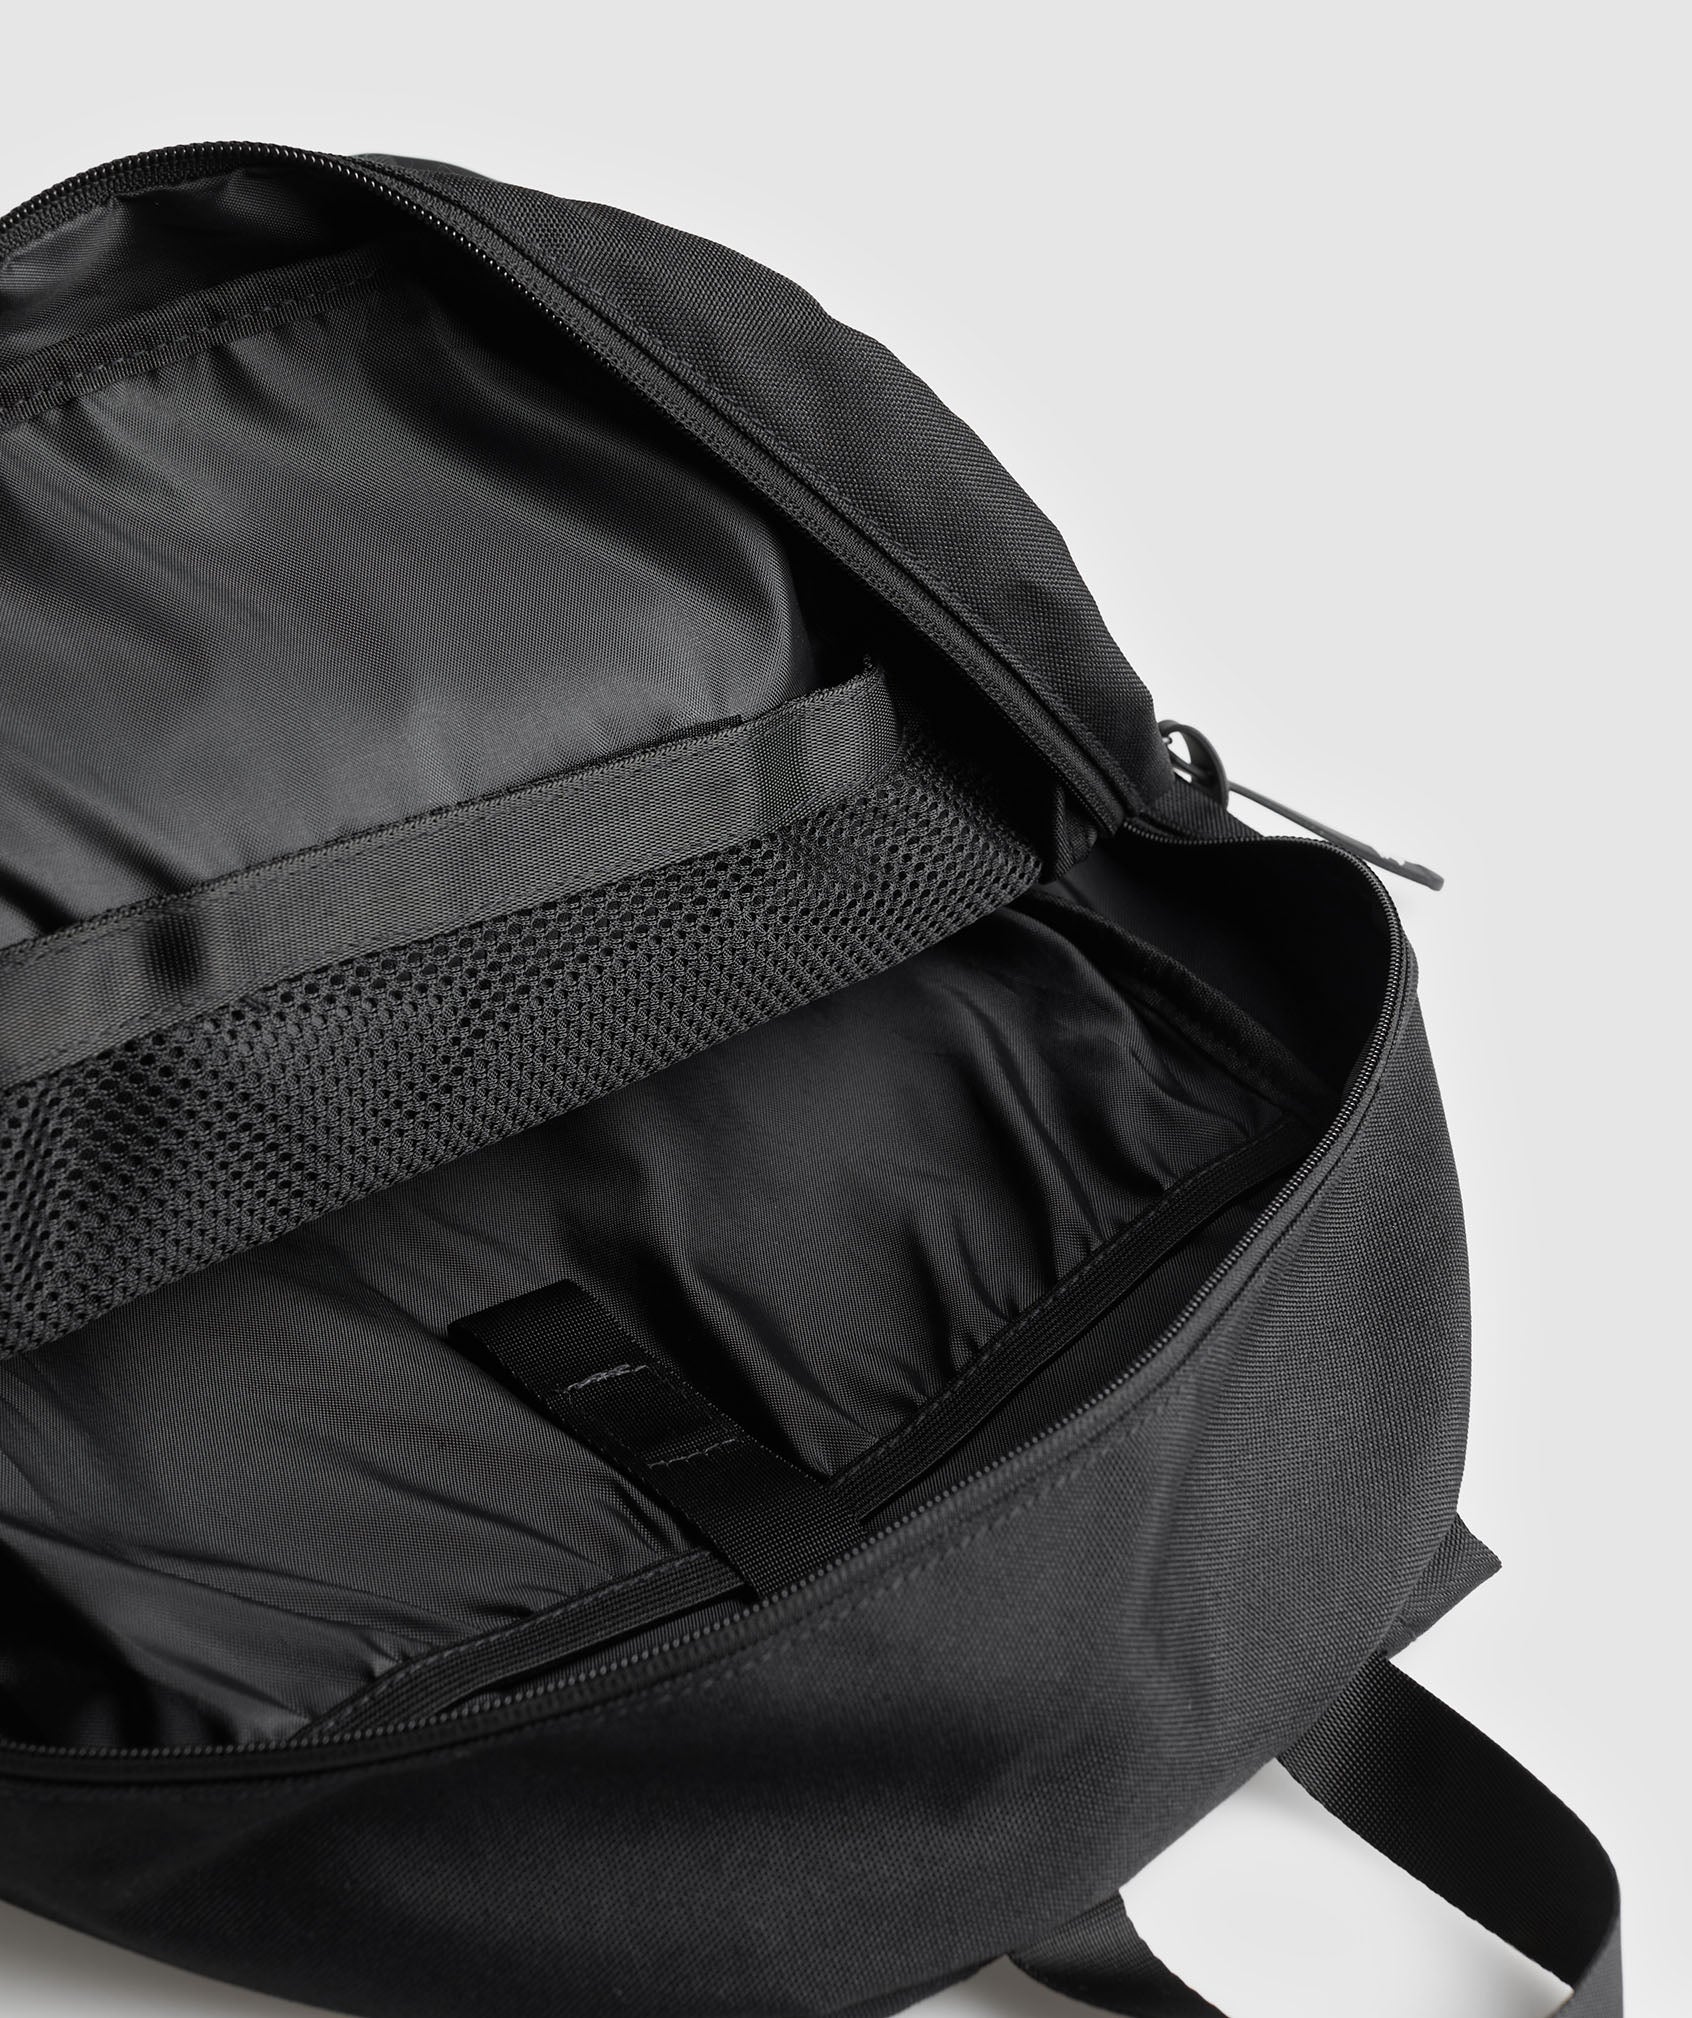 Everyday Backpack in Black - view 4